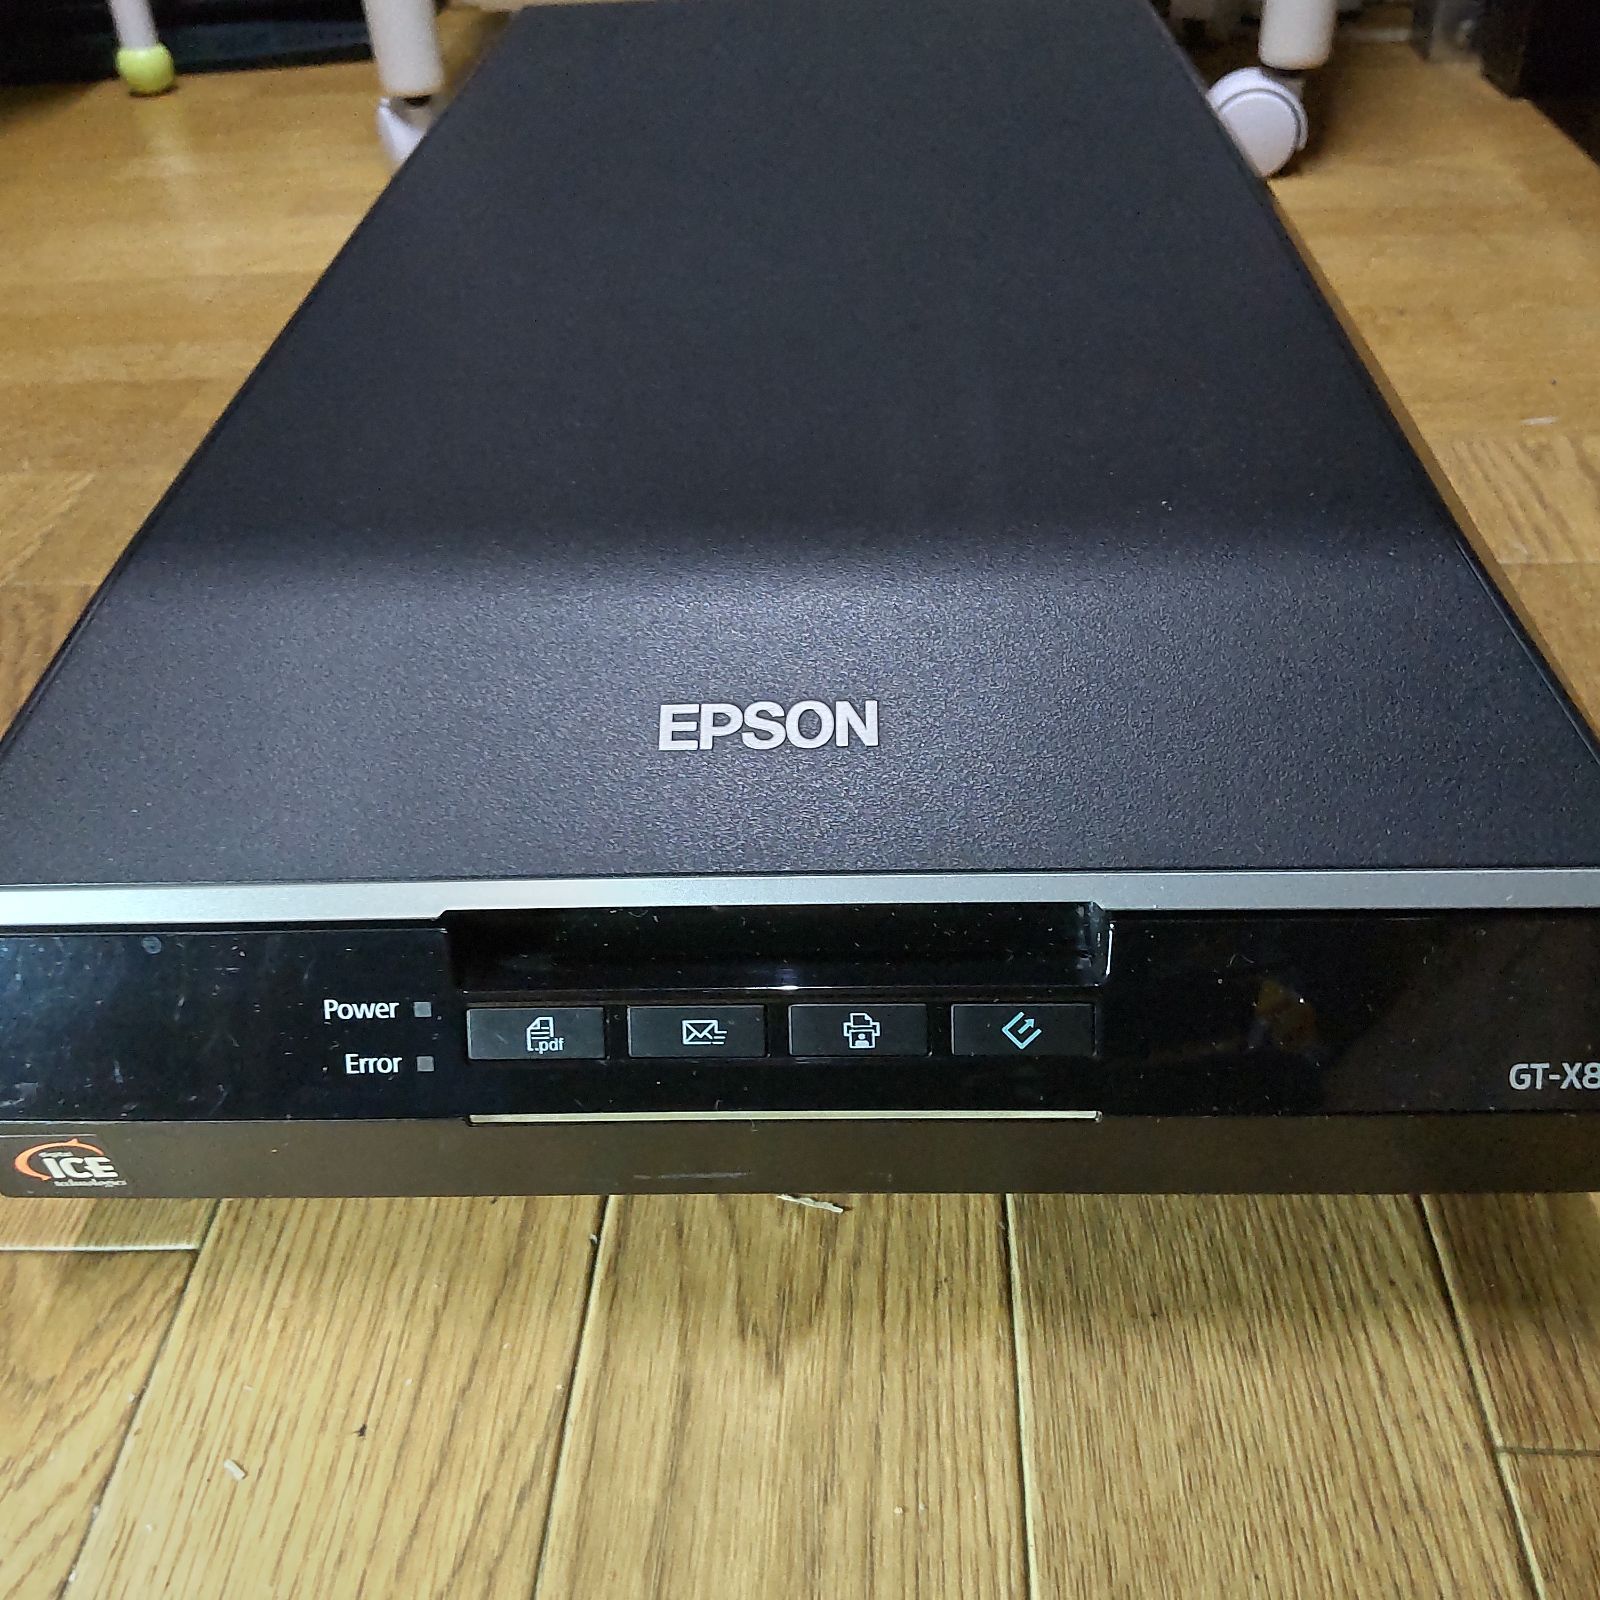 EPSON GT-X820 フィルムスキャナー フィルムホルダー付属 動作良好